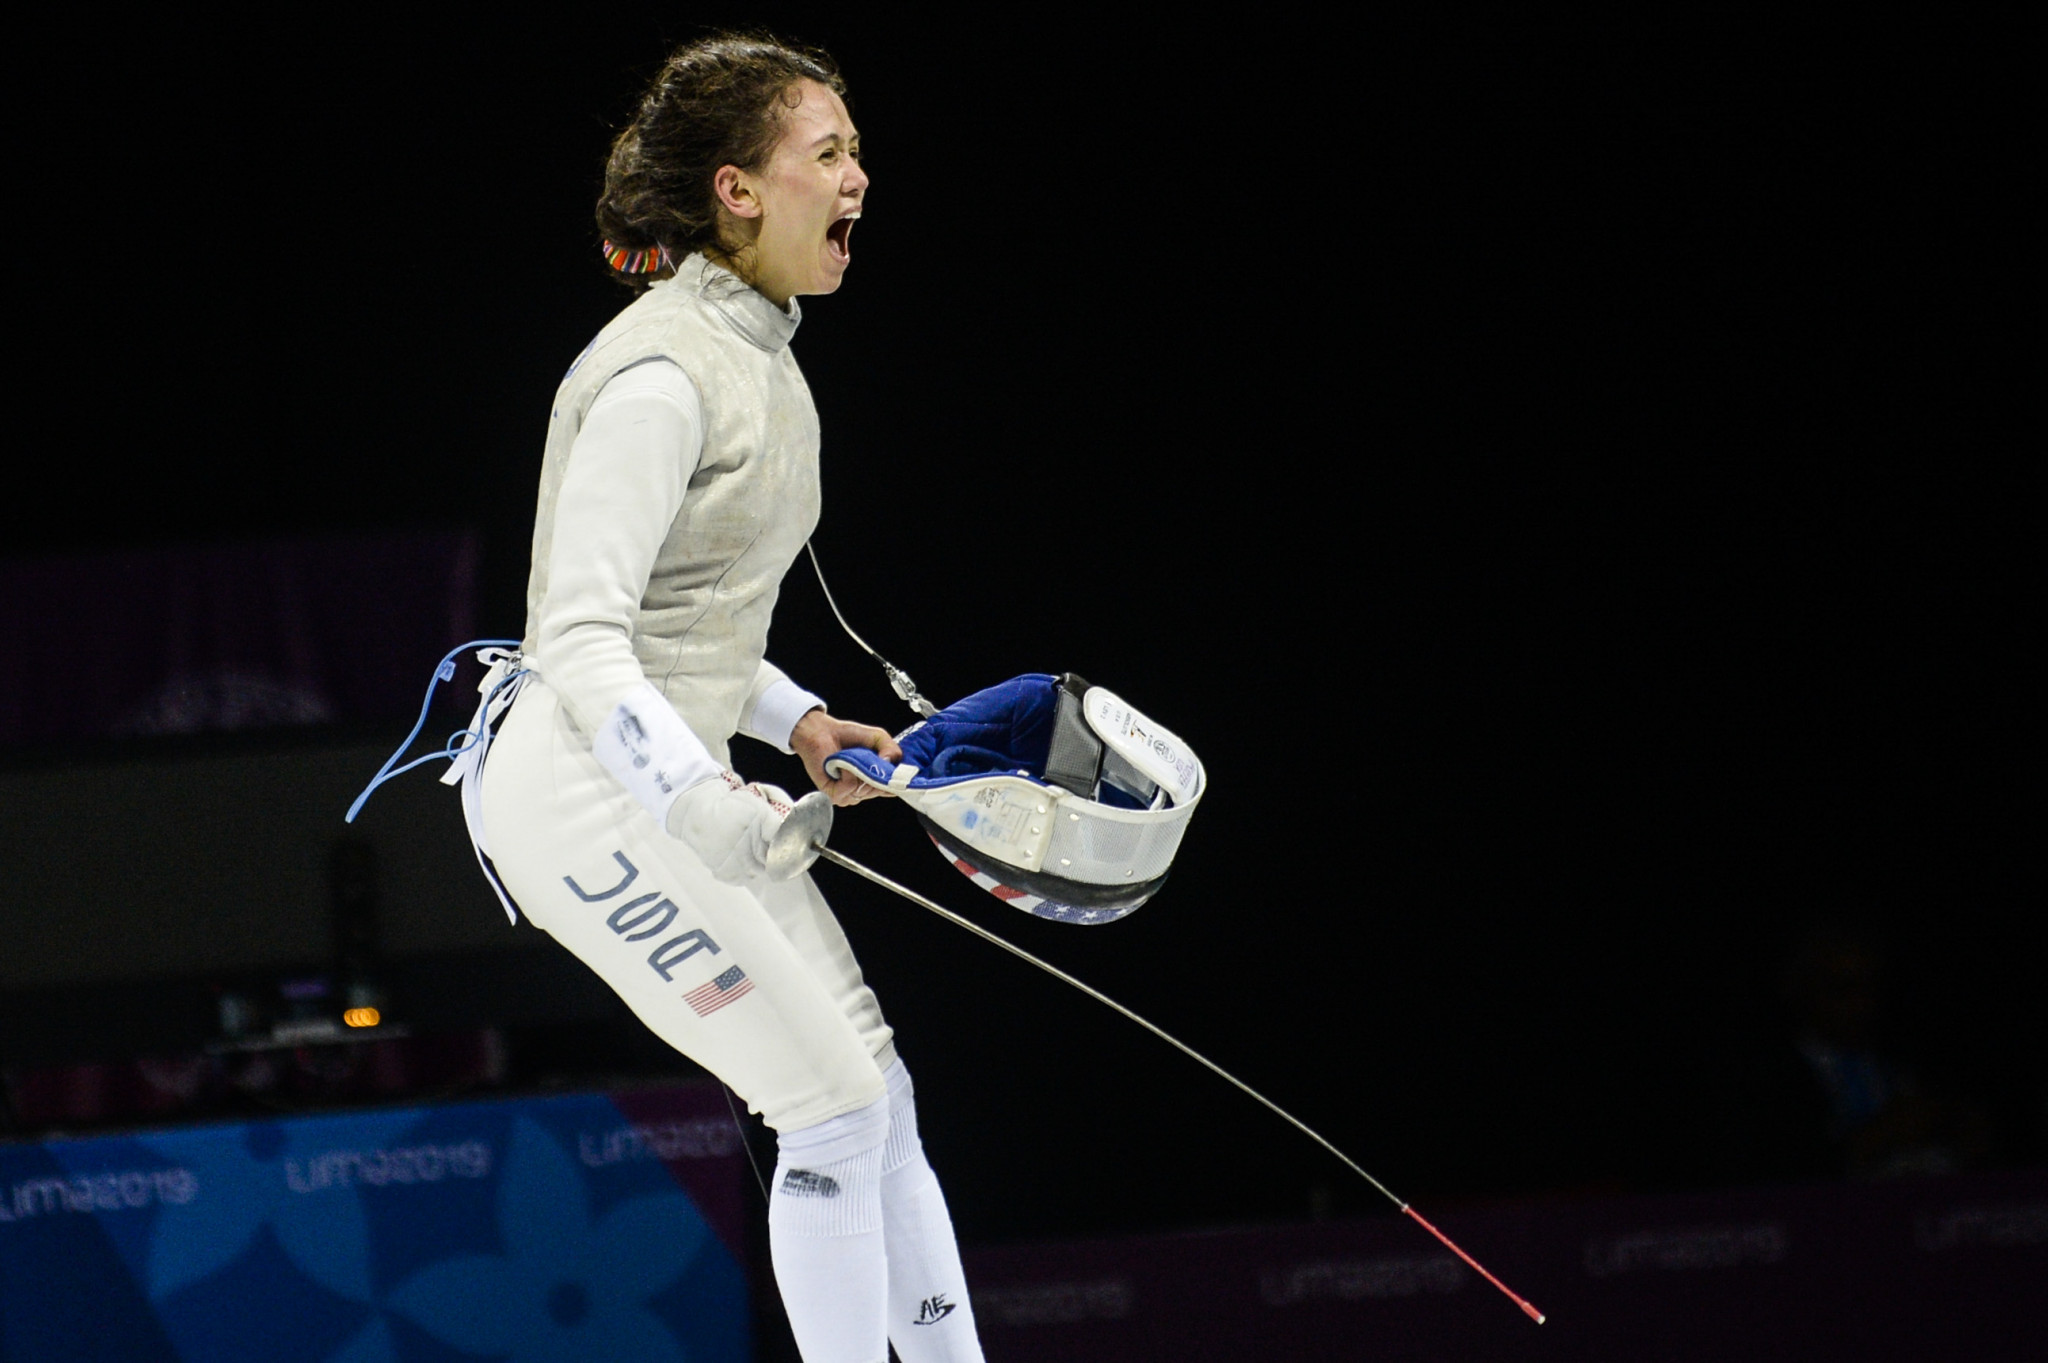 Lee Kiefer won her third consecutive Pan American Games women's foil title ©Getty Images